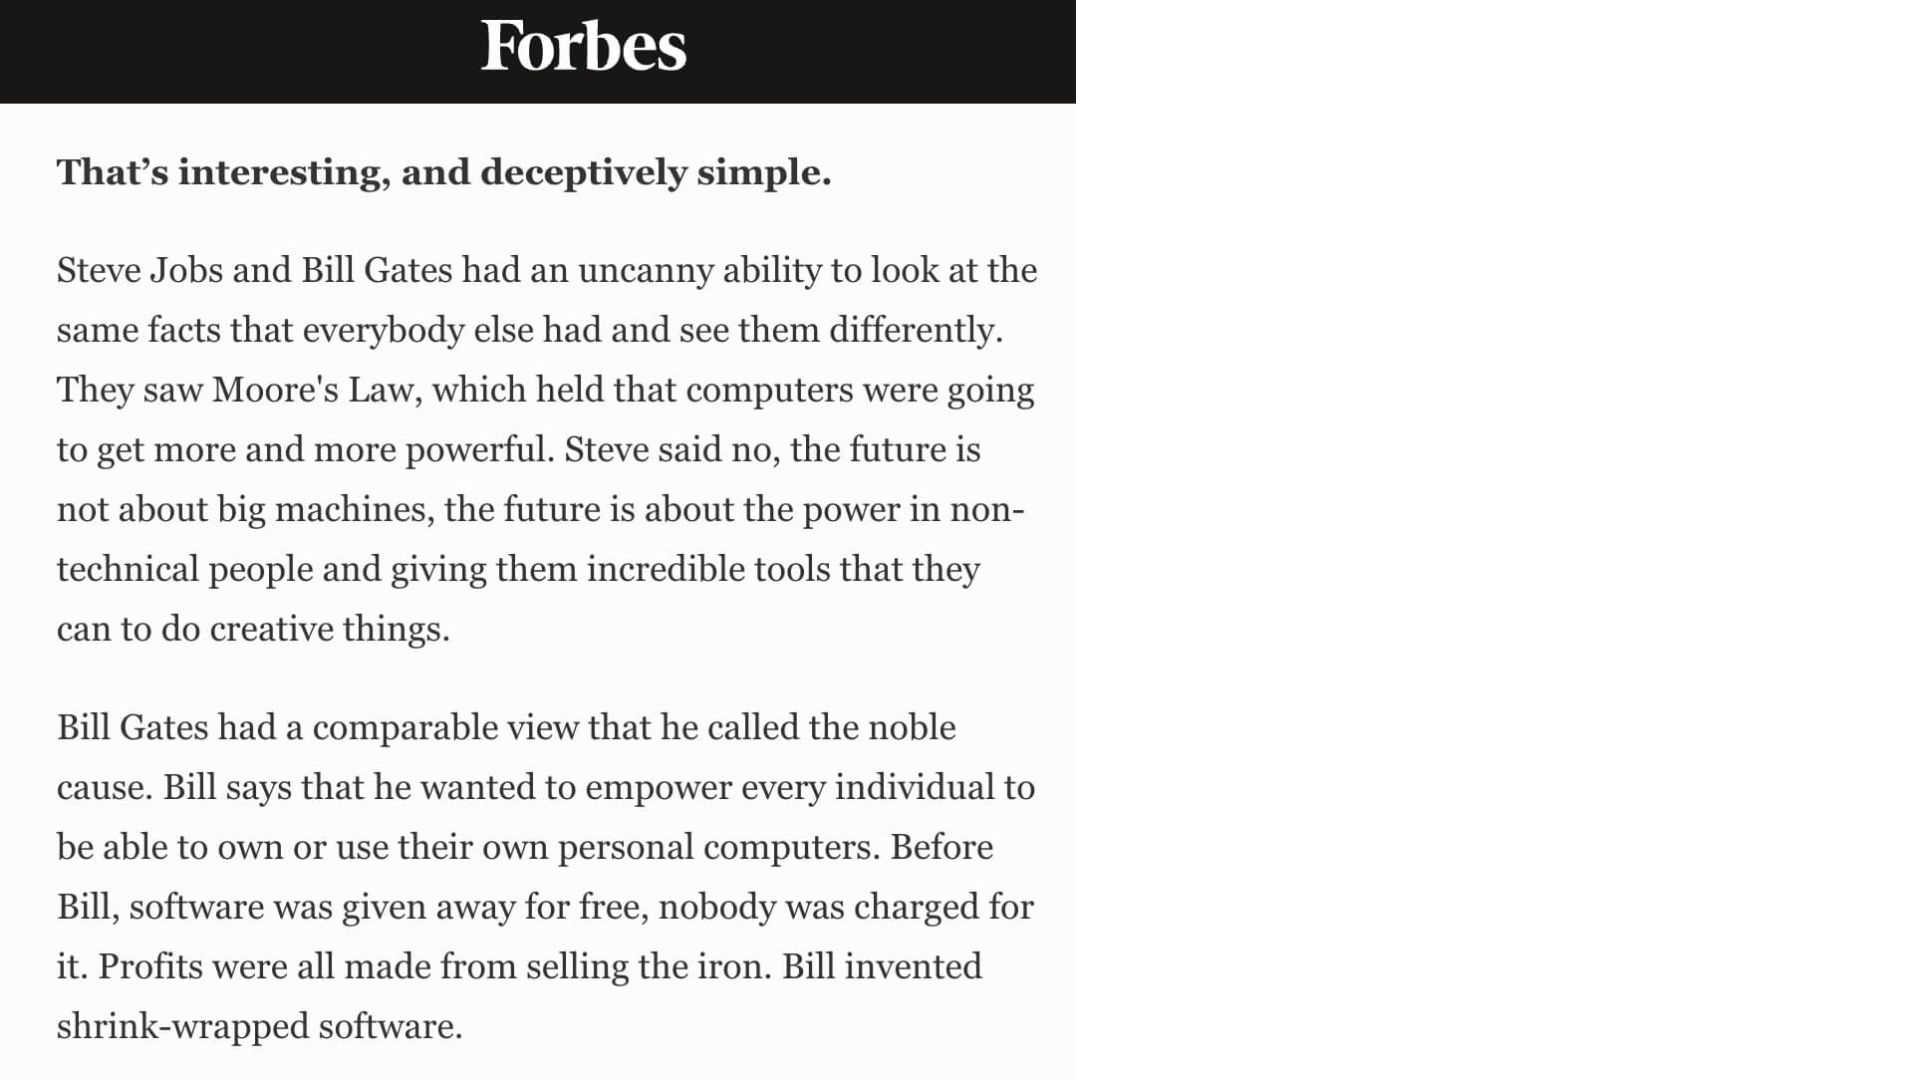 Forbes article snippet about Steve Jobs